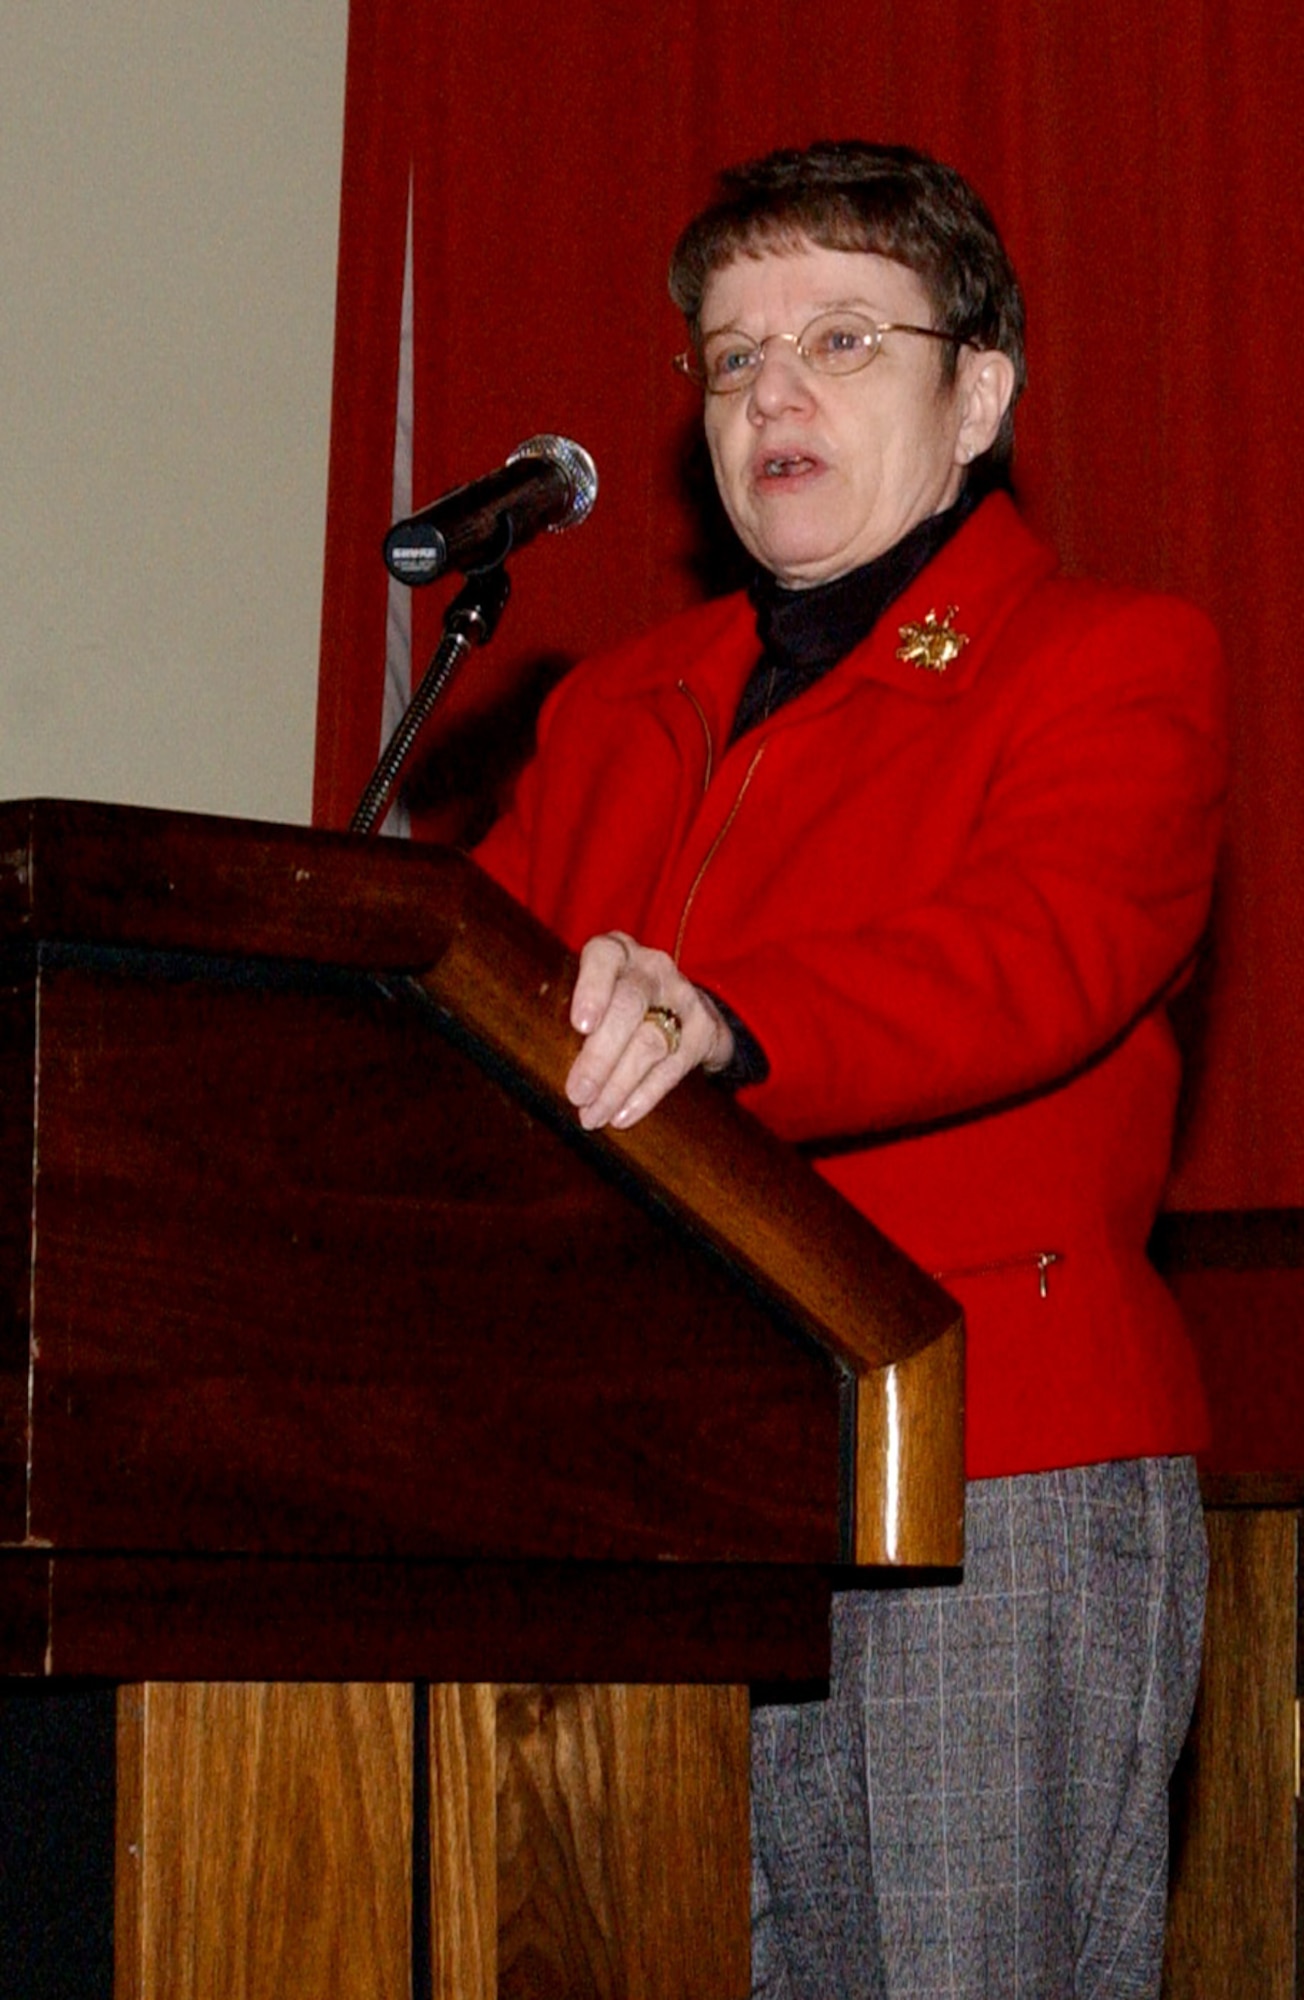 Lorraine Potter, a retired major general who holds the distinction of being the Air Force’s first female chaplain, speaks at the National Prayer Luncheon Feb. 12 at the Galaxy Club on RAF Mildenhall.